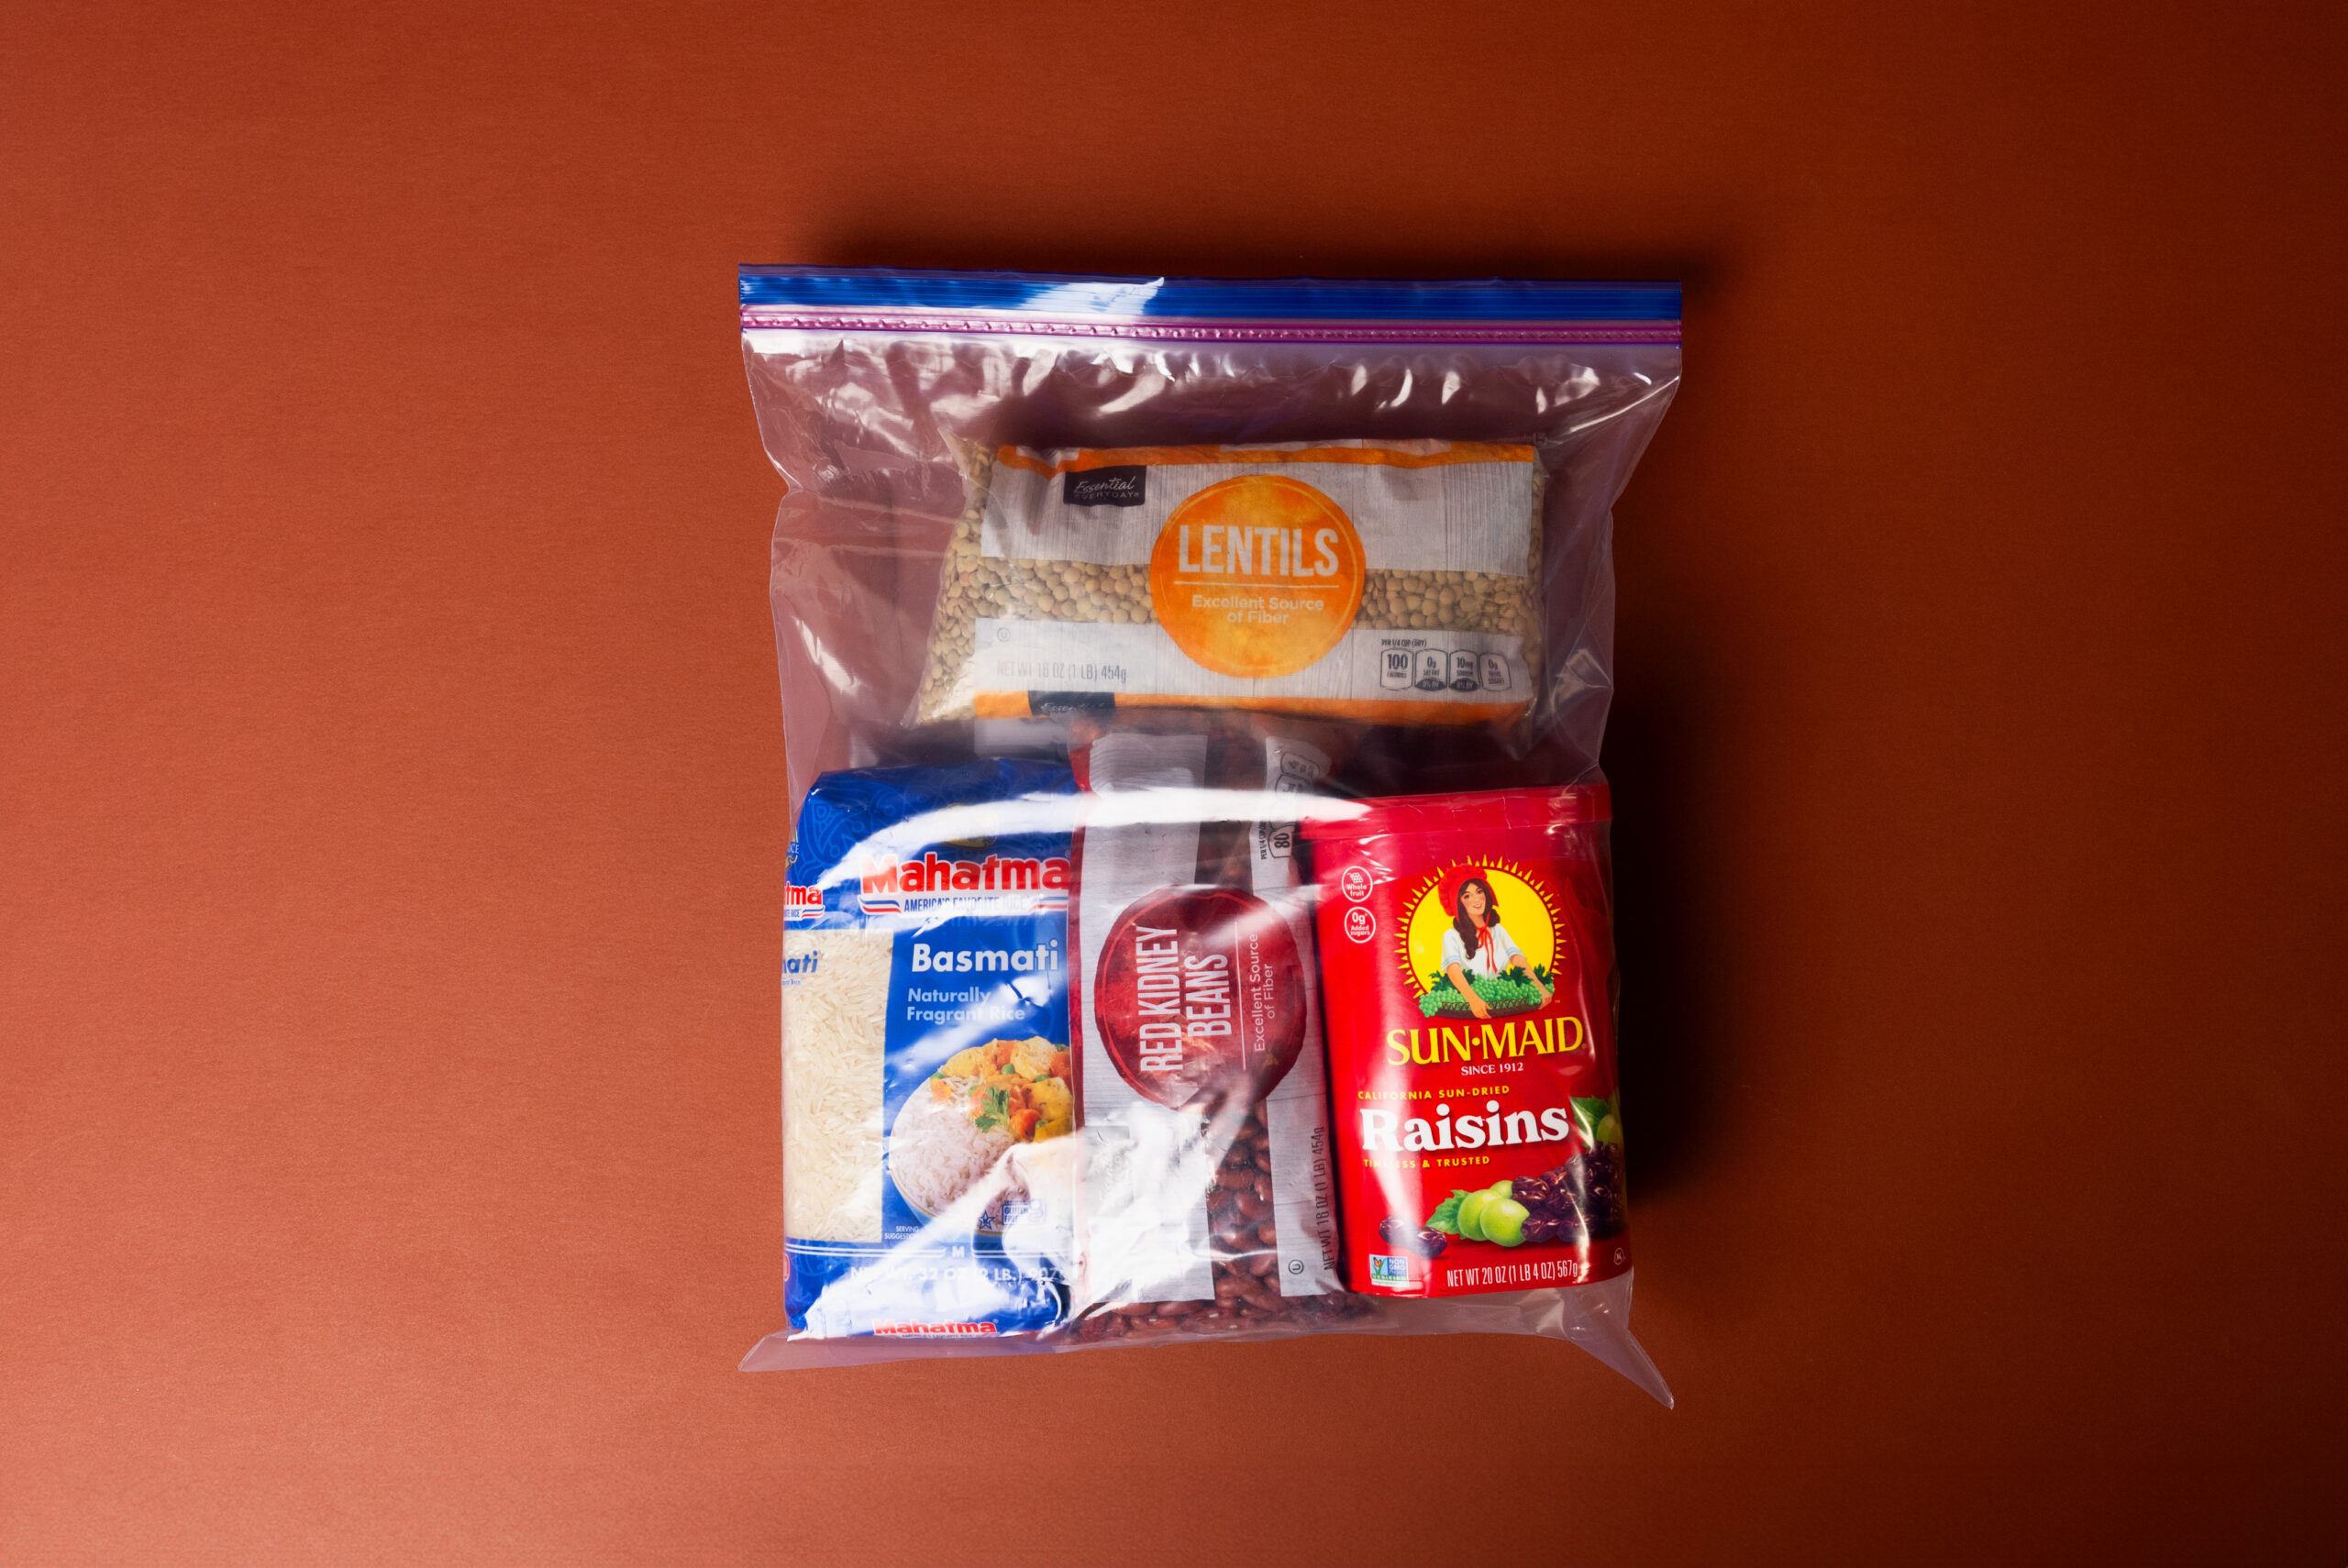 A Ziploc bag is filled with Afghan staple food items